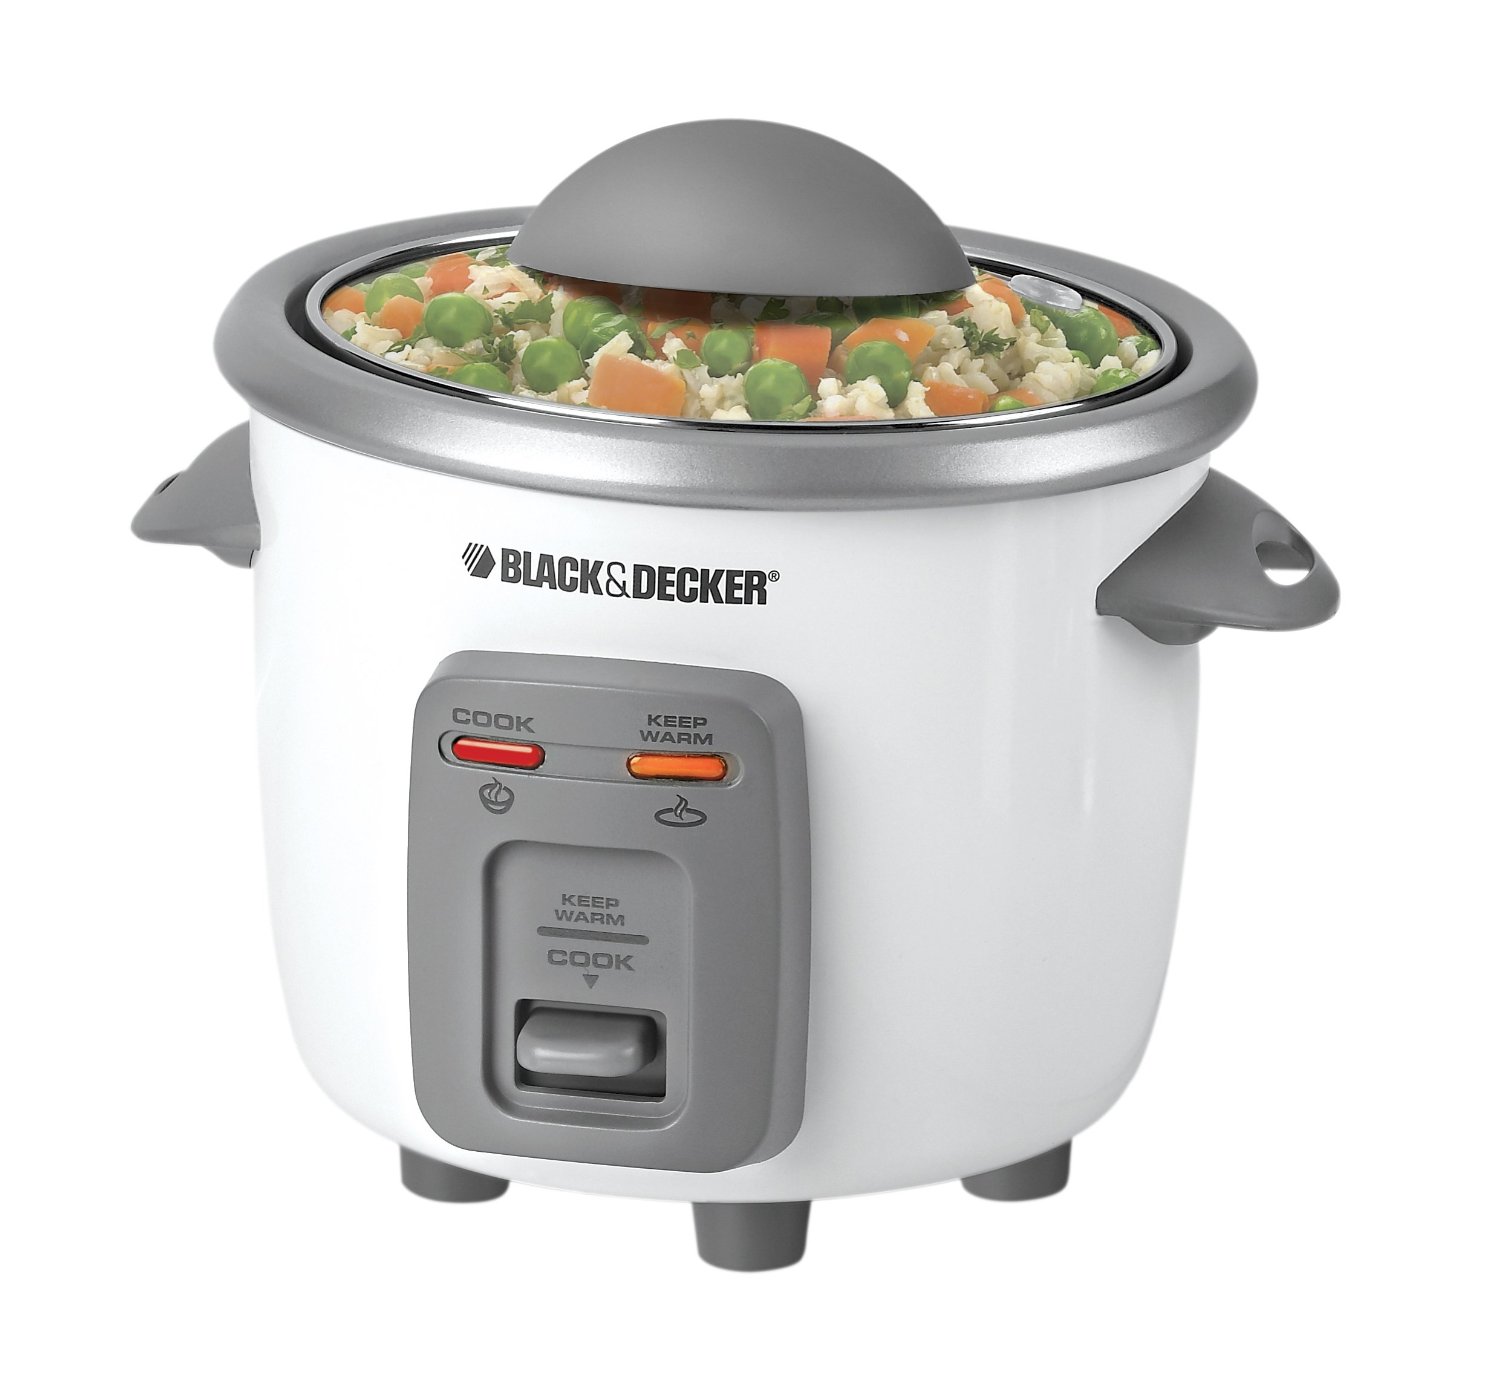 Black & Decker Rice Cookers on Sale!